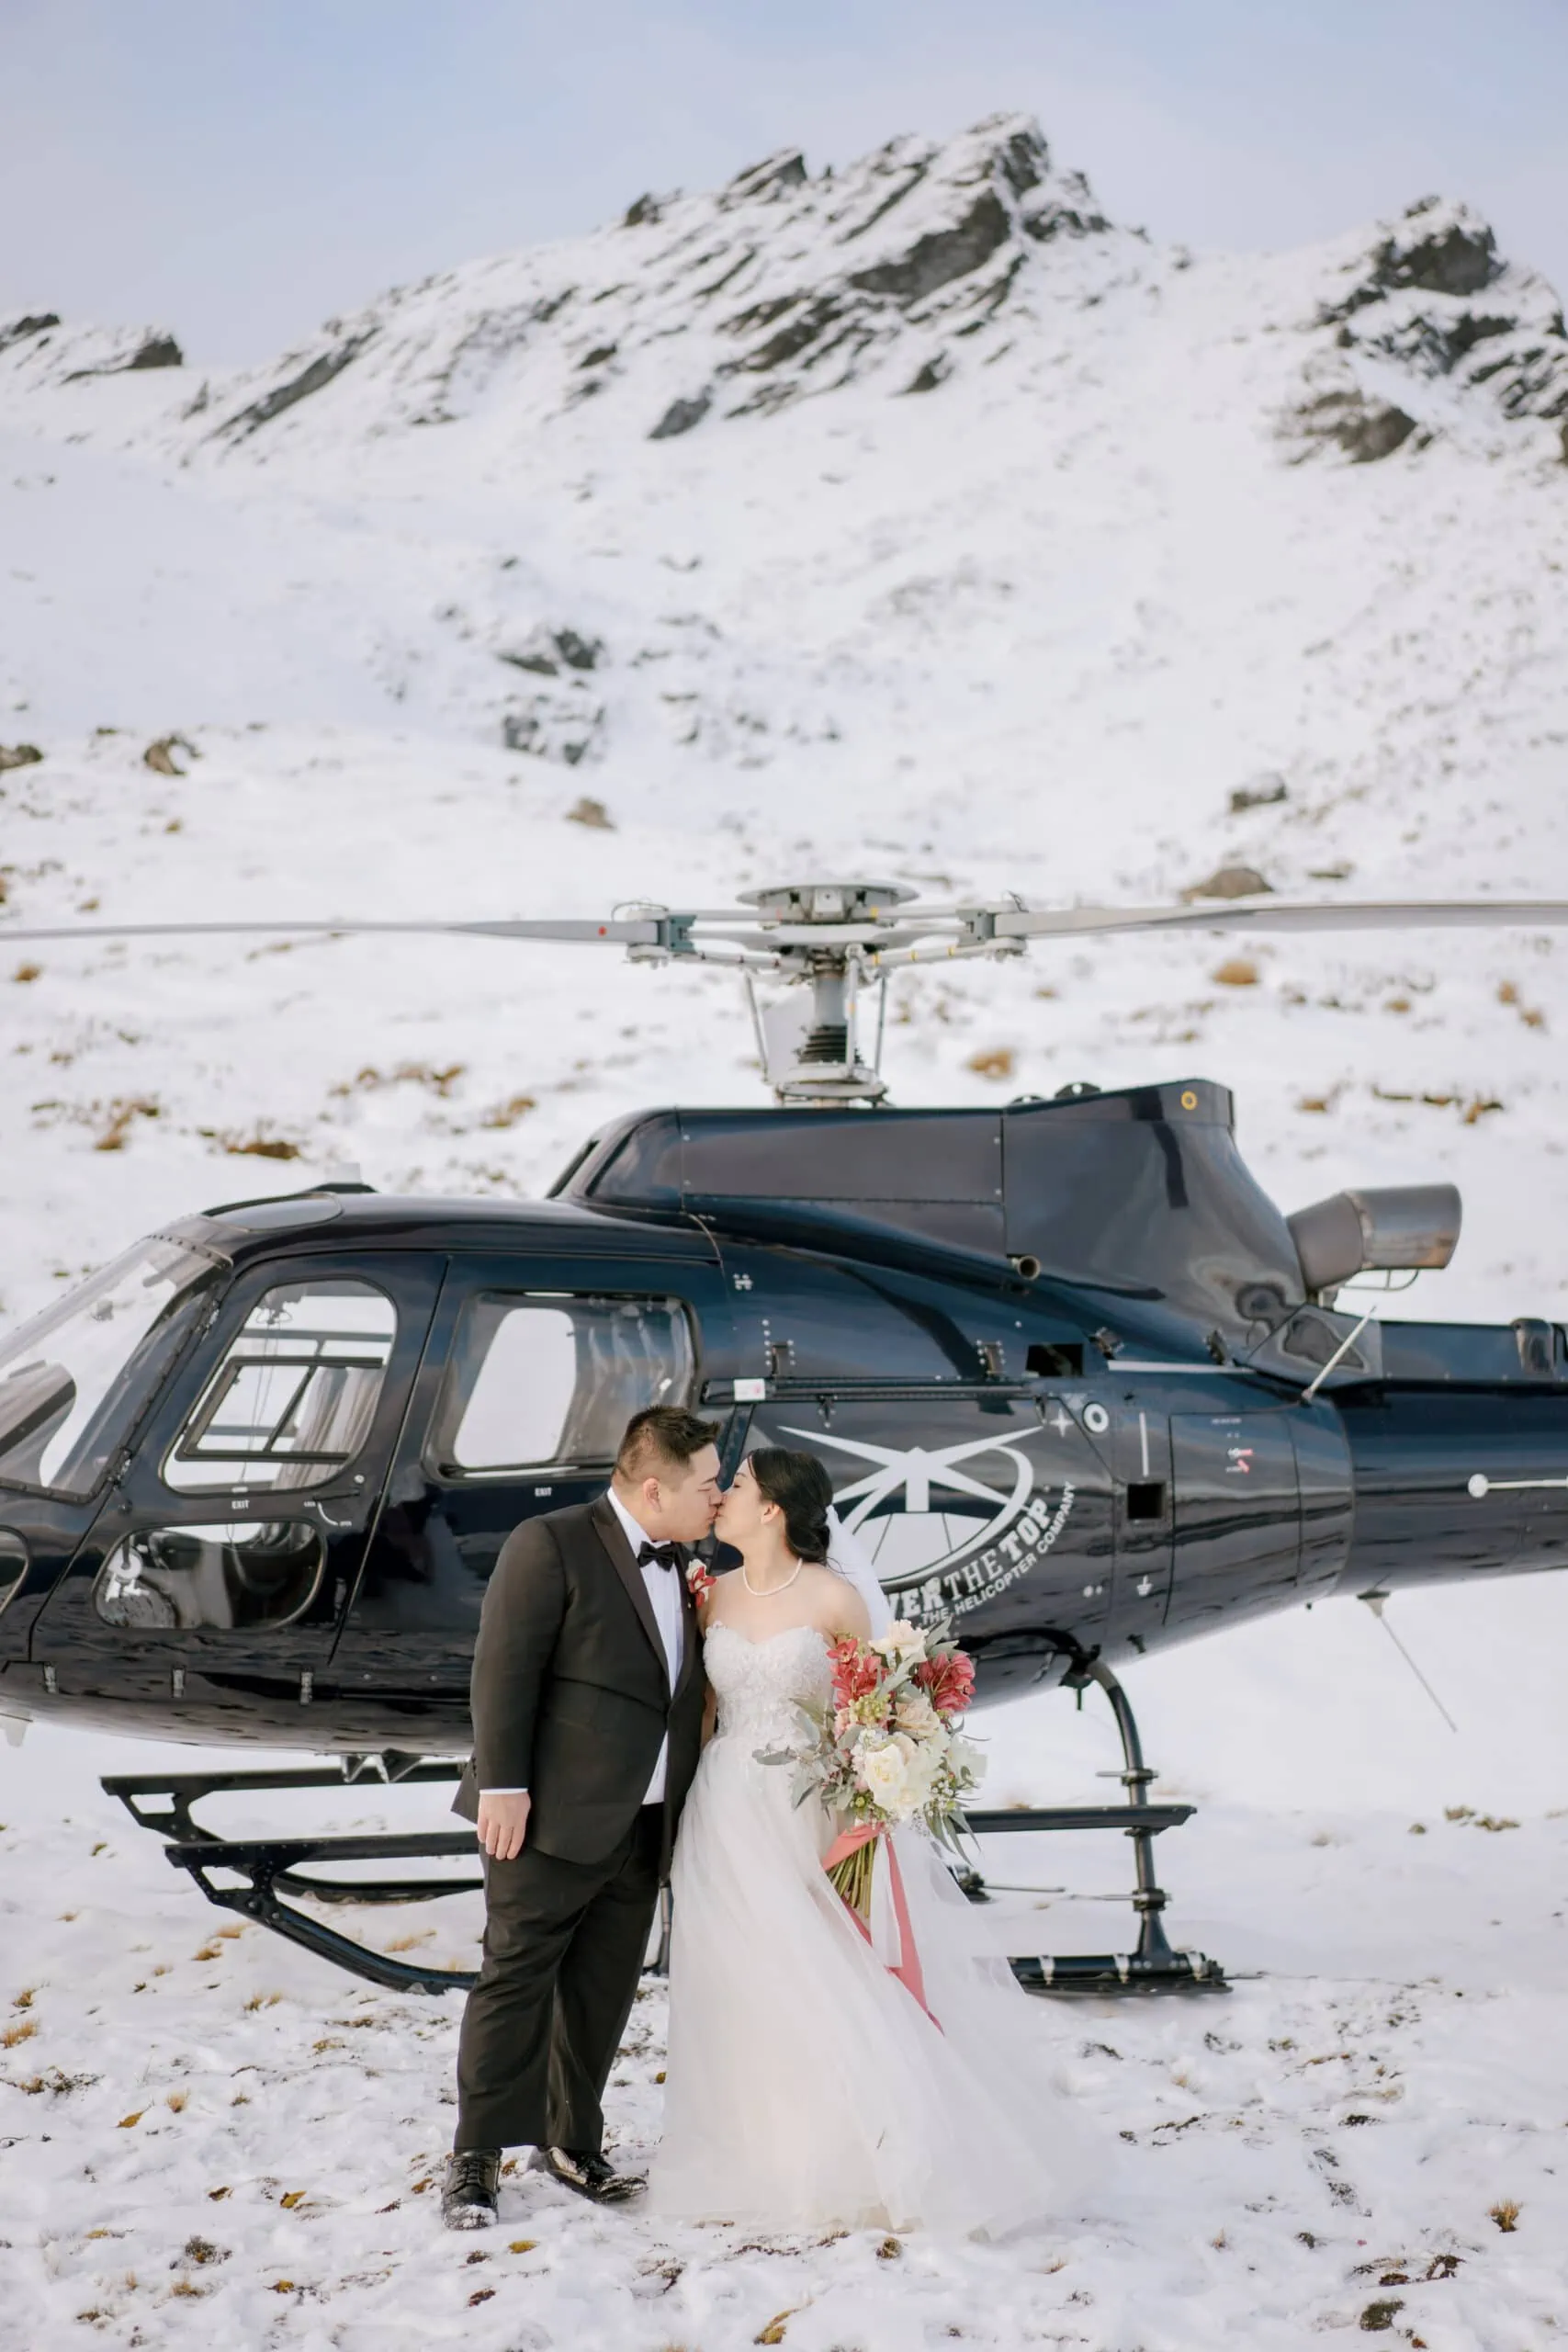 Queenstown New Zealand Elopement Wedding Photographer - A snowy wedding shoot featuring Lam and Wendy's helicopter at Kamana Lakehouse.